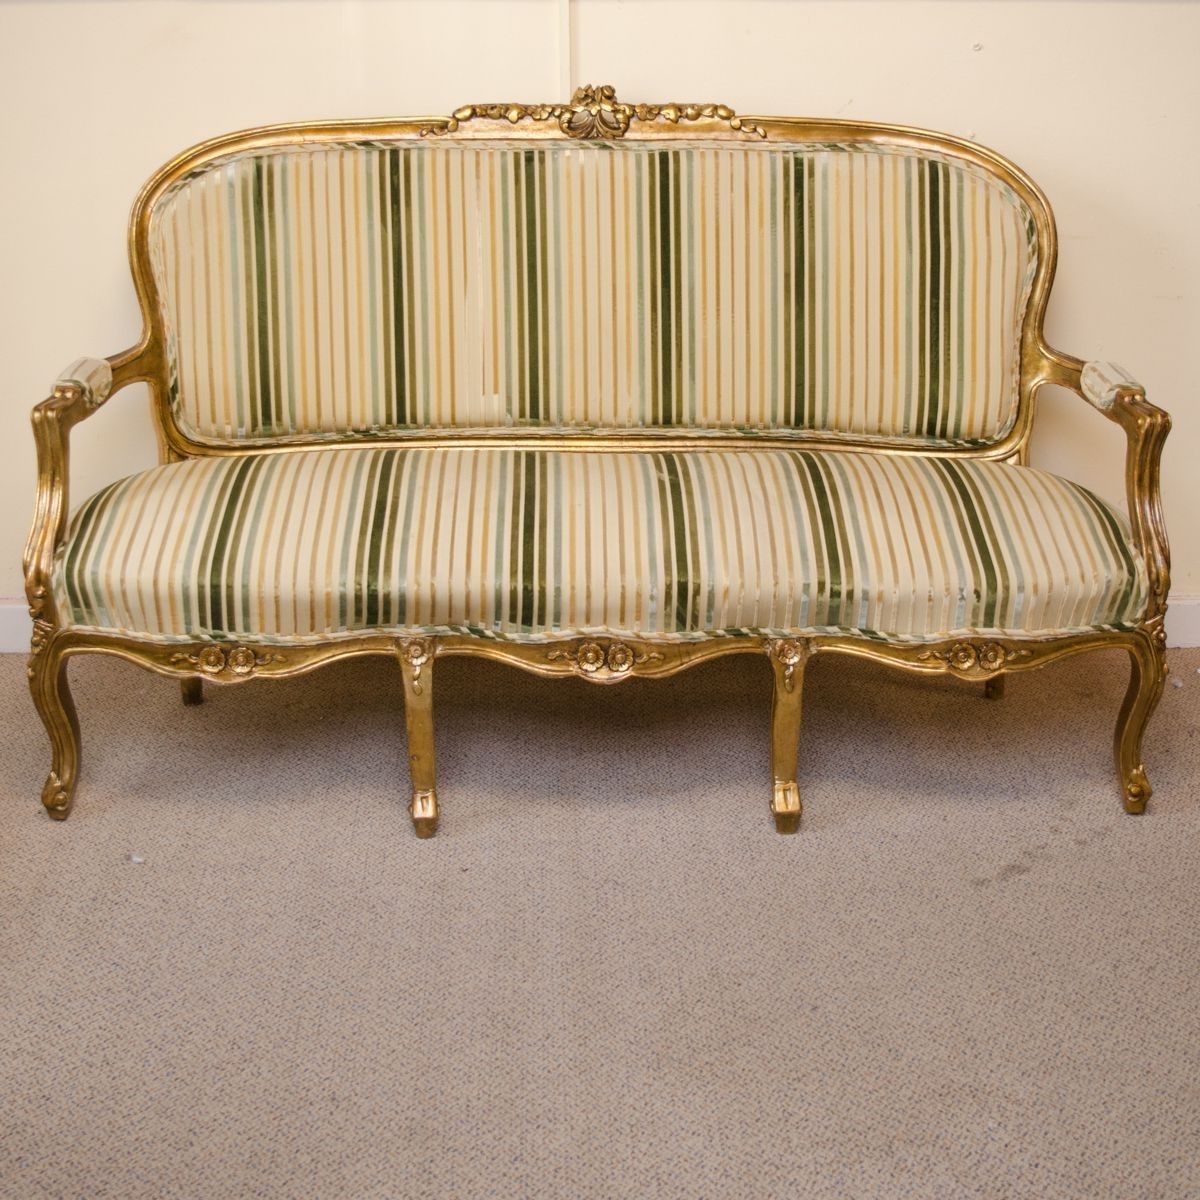 Victorian Gilded Open Frame Sofa – Antique Sofas – Hemswell For 2017 Antique Sofas (View 4 of 15)